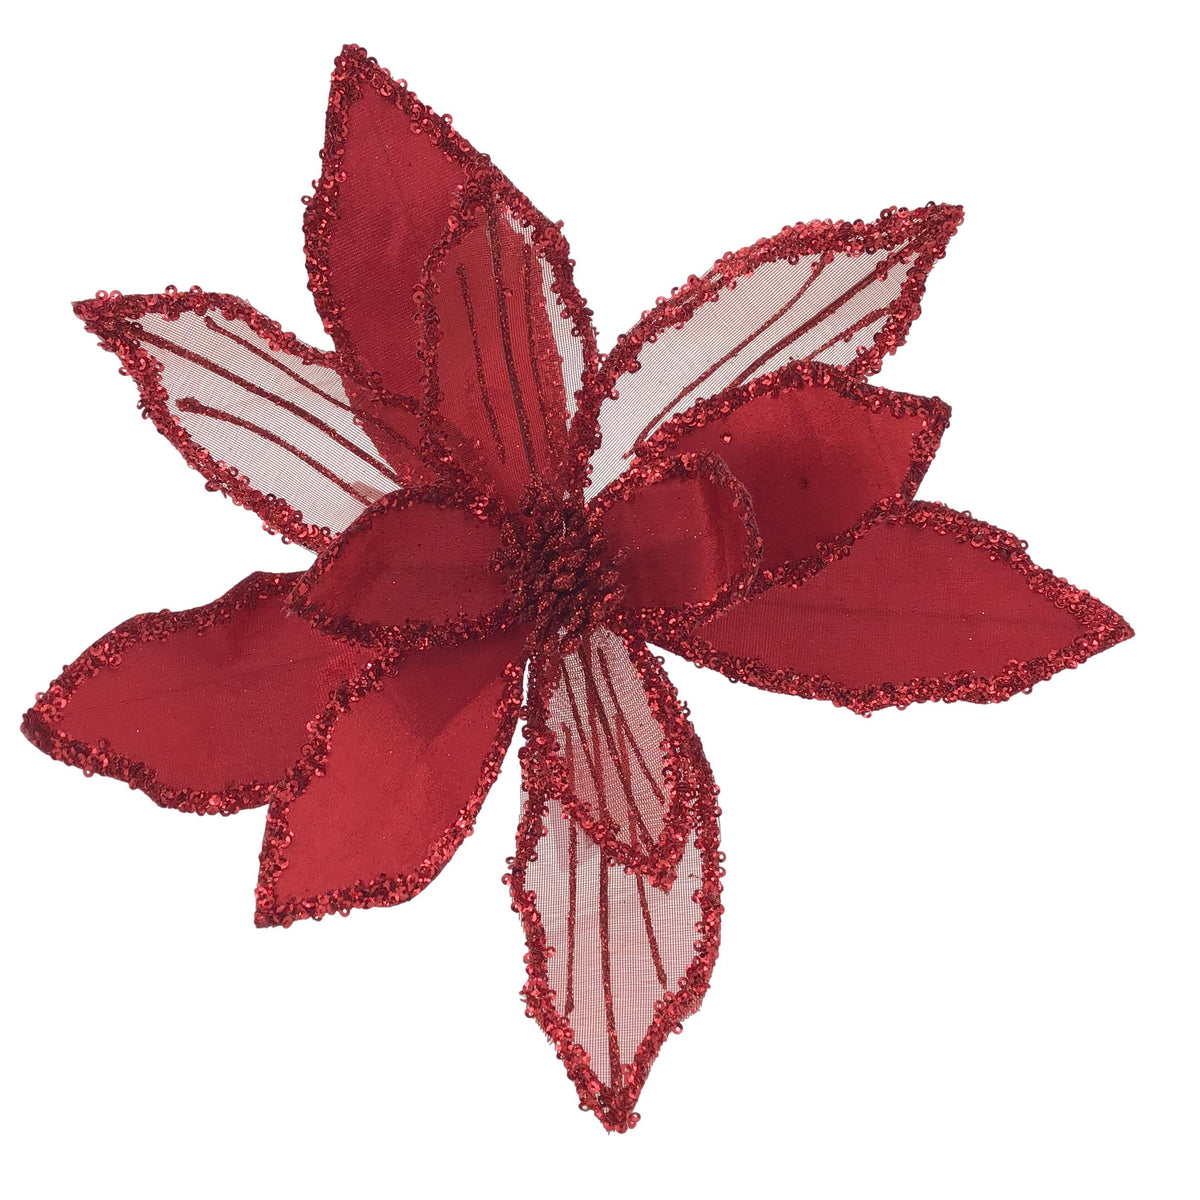 Red Poinsettia - My Christmas